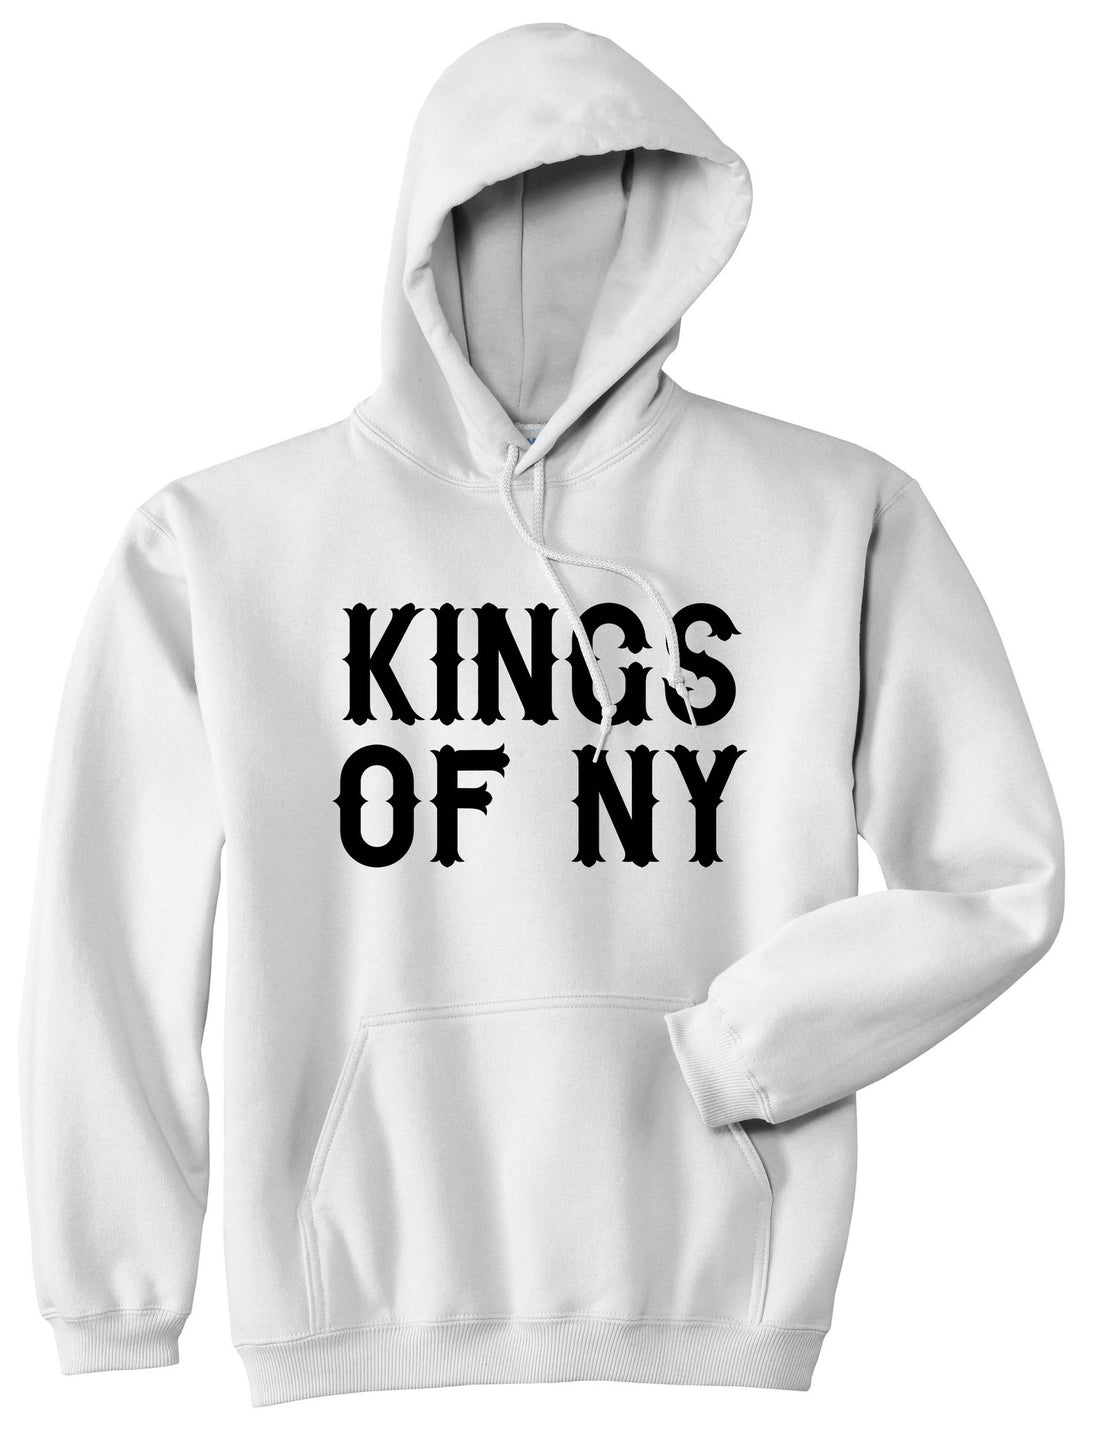 FALL15 Font Logo Print Boys Kids Pullover Hoodie Hoody in White by Kings Of NY